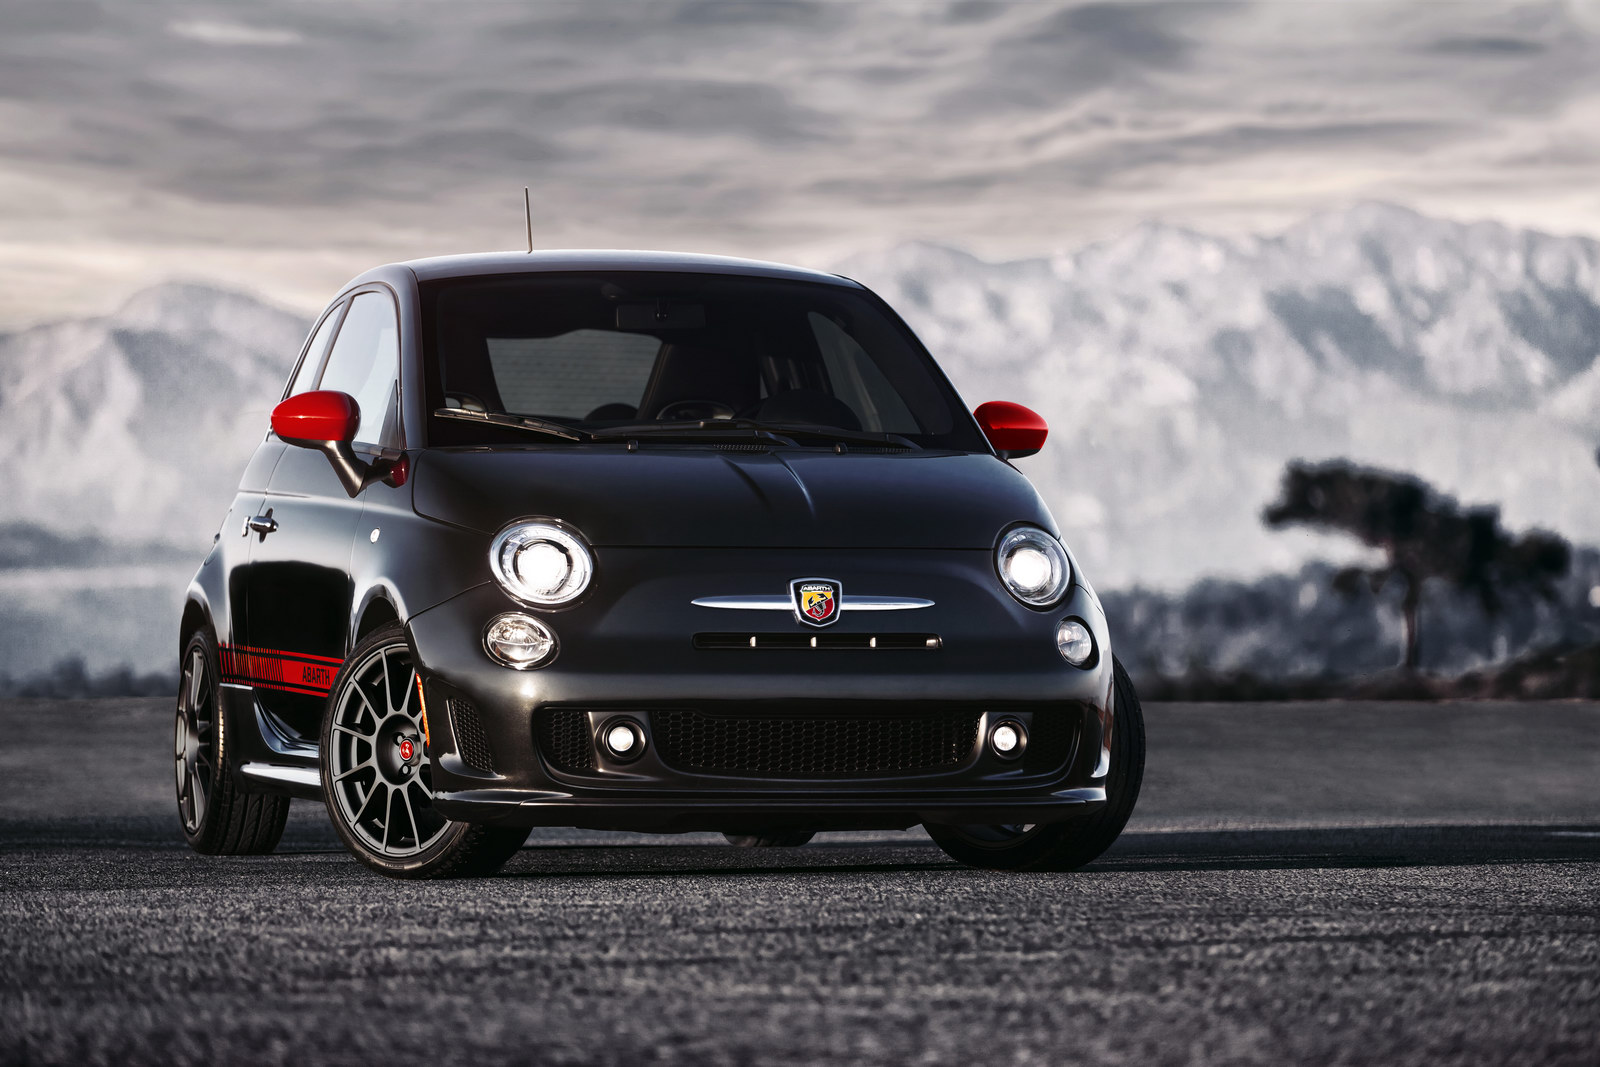 New 2012 Fiat 500 Abarth Hits U.S. Shores with 160HP 1.4L Turbo Engine [36  Photos]